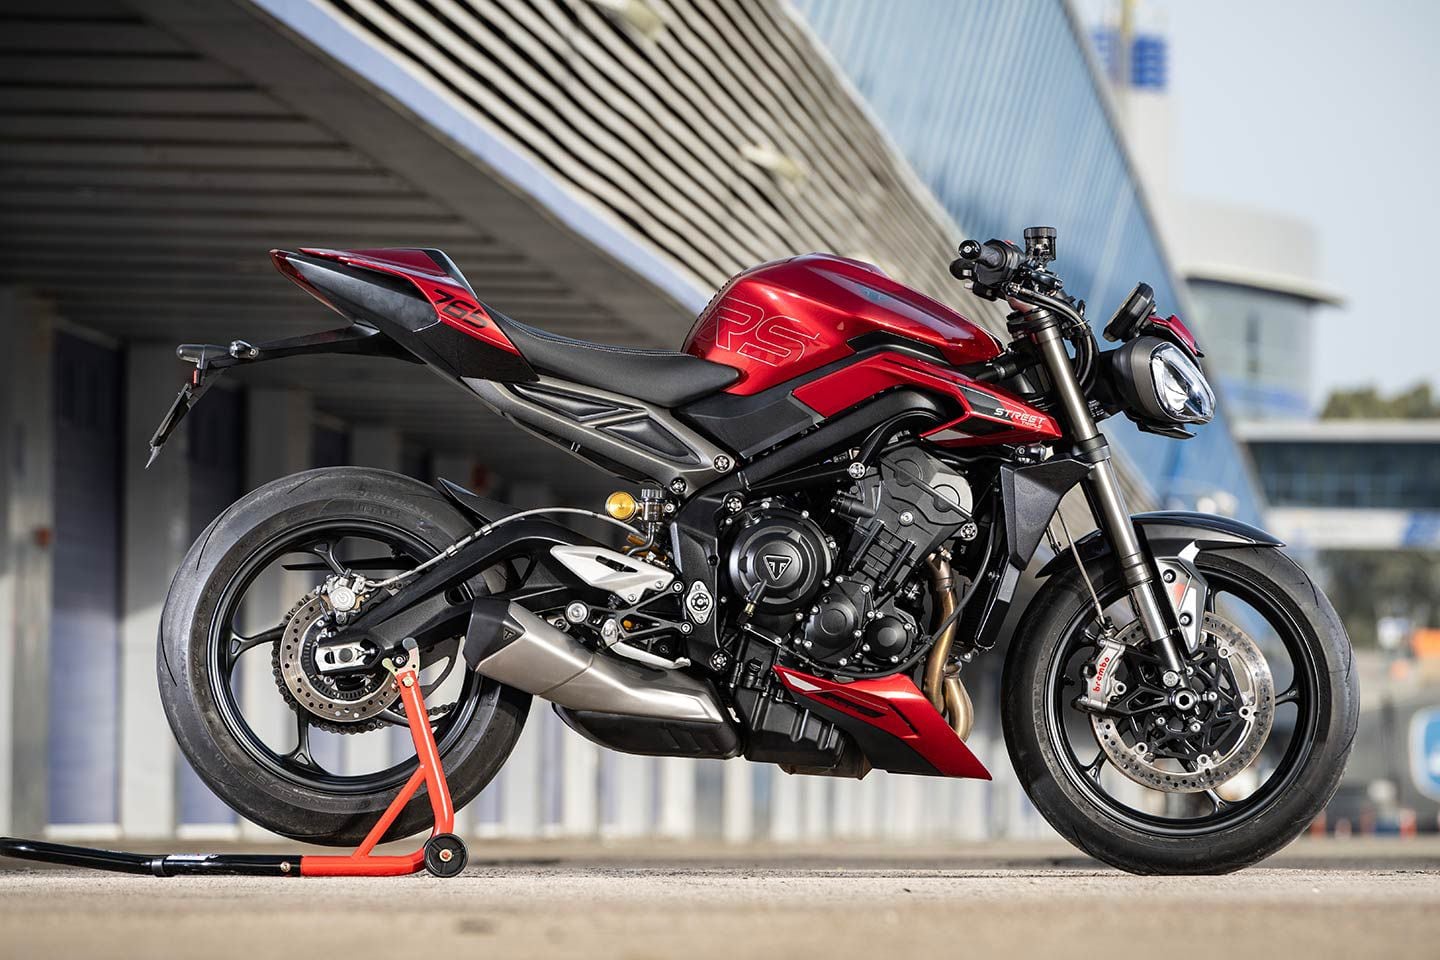 The Street Triple’s design continues to be centered around a nose-down stance. On a rear stand and stripped of mirrors, the RS looks undoubtedly sporty.